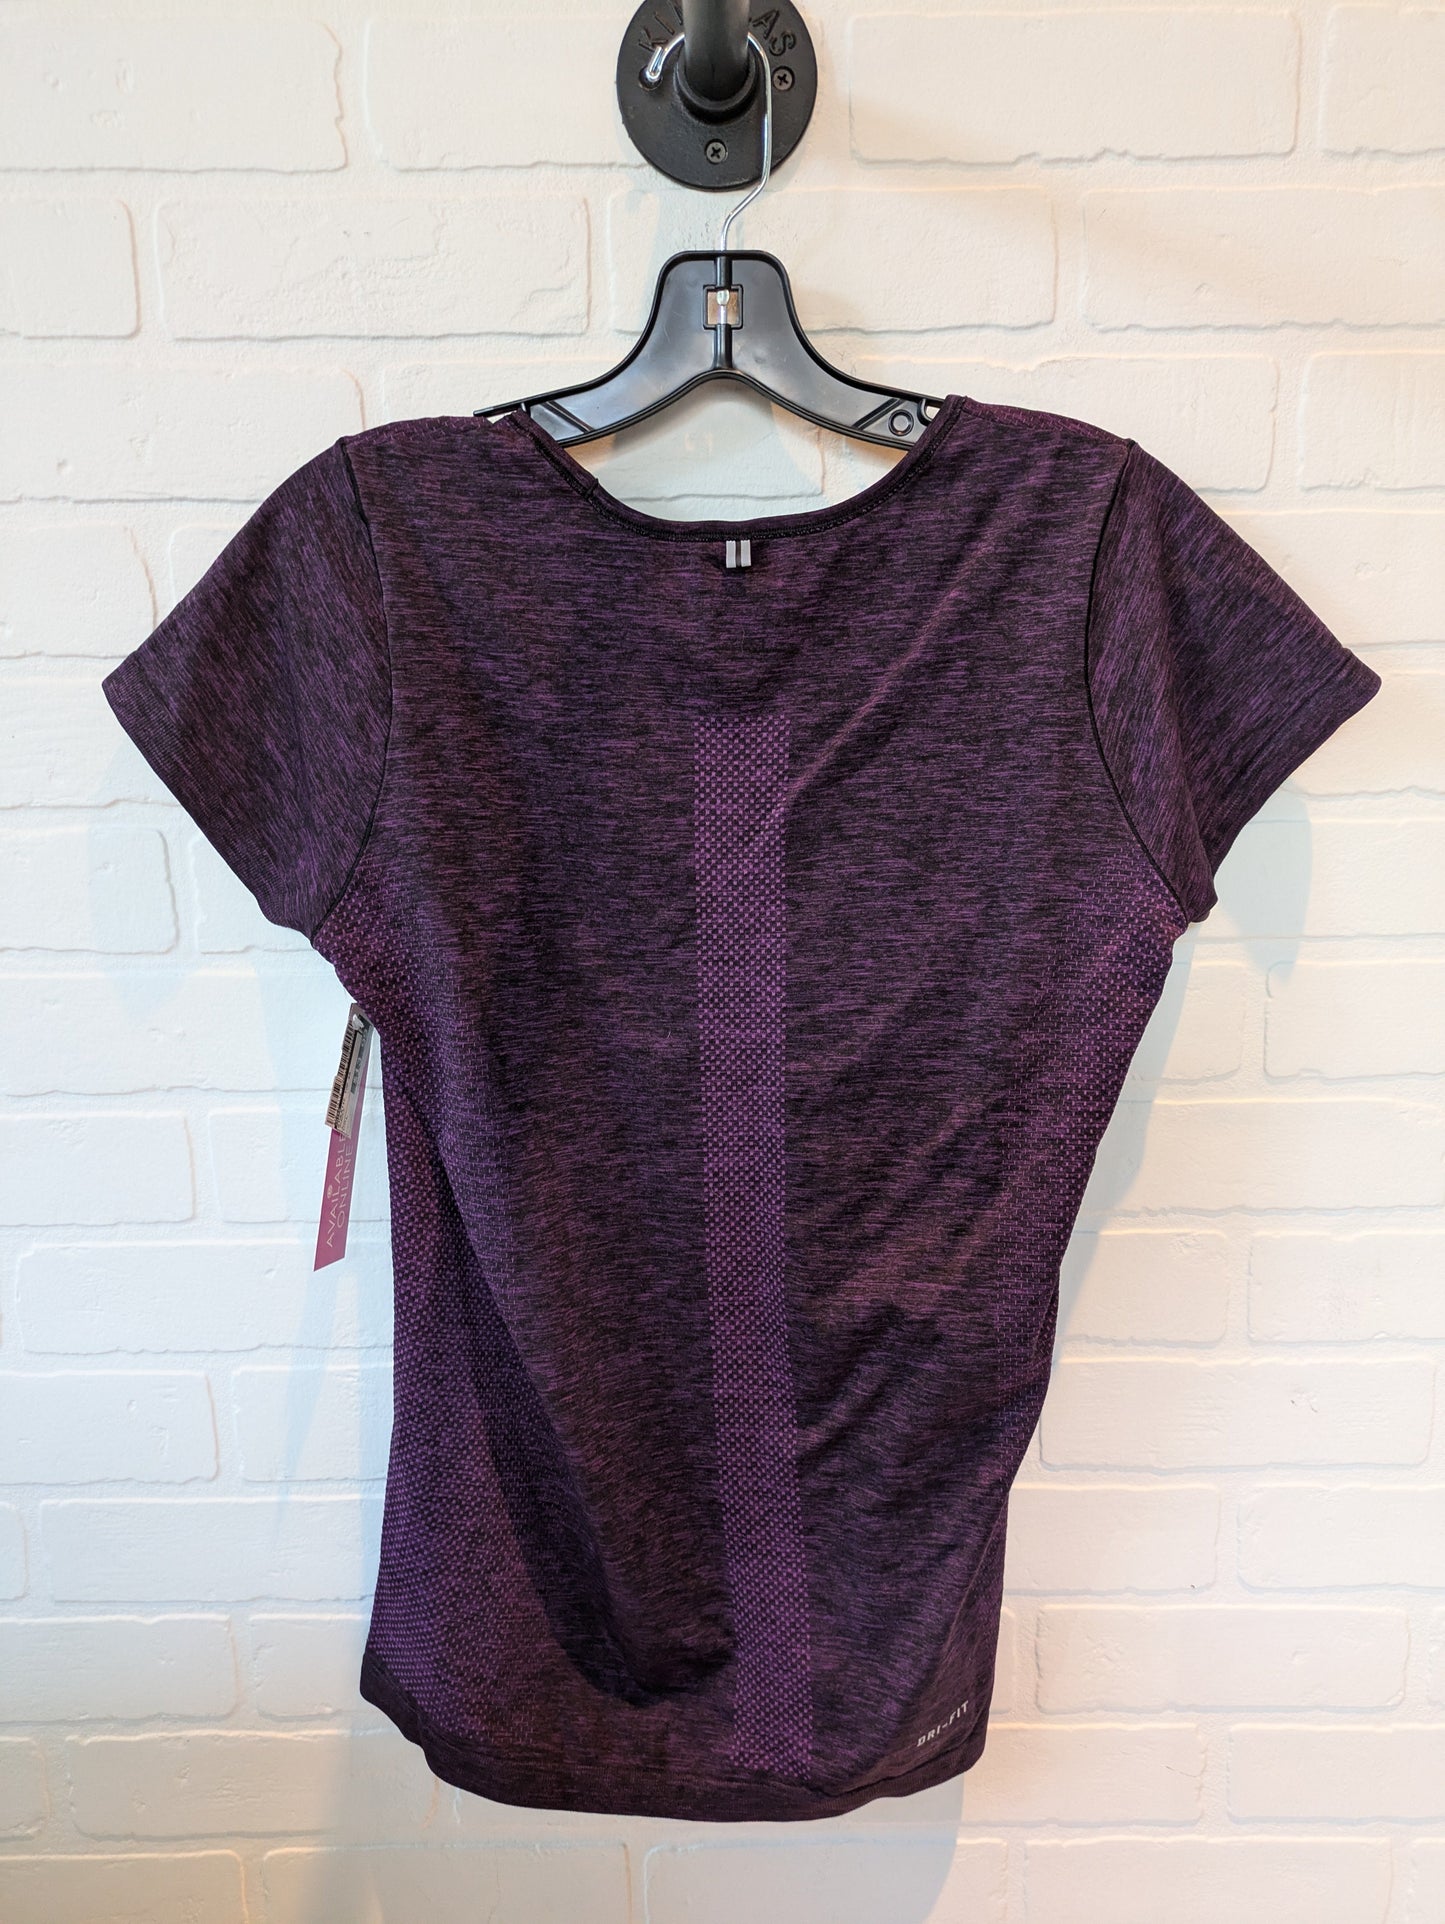 Purple Athletic Top Short Sleeve Nike, Size L